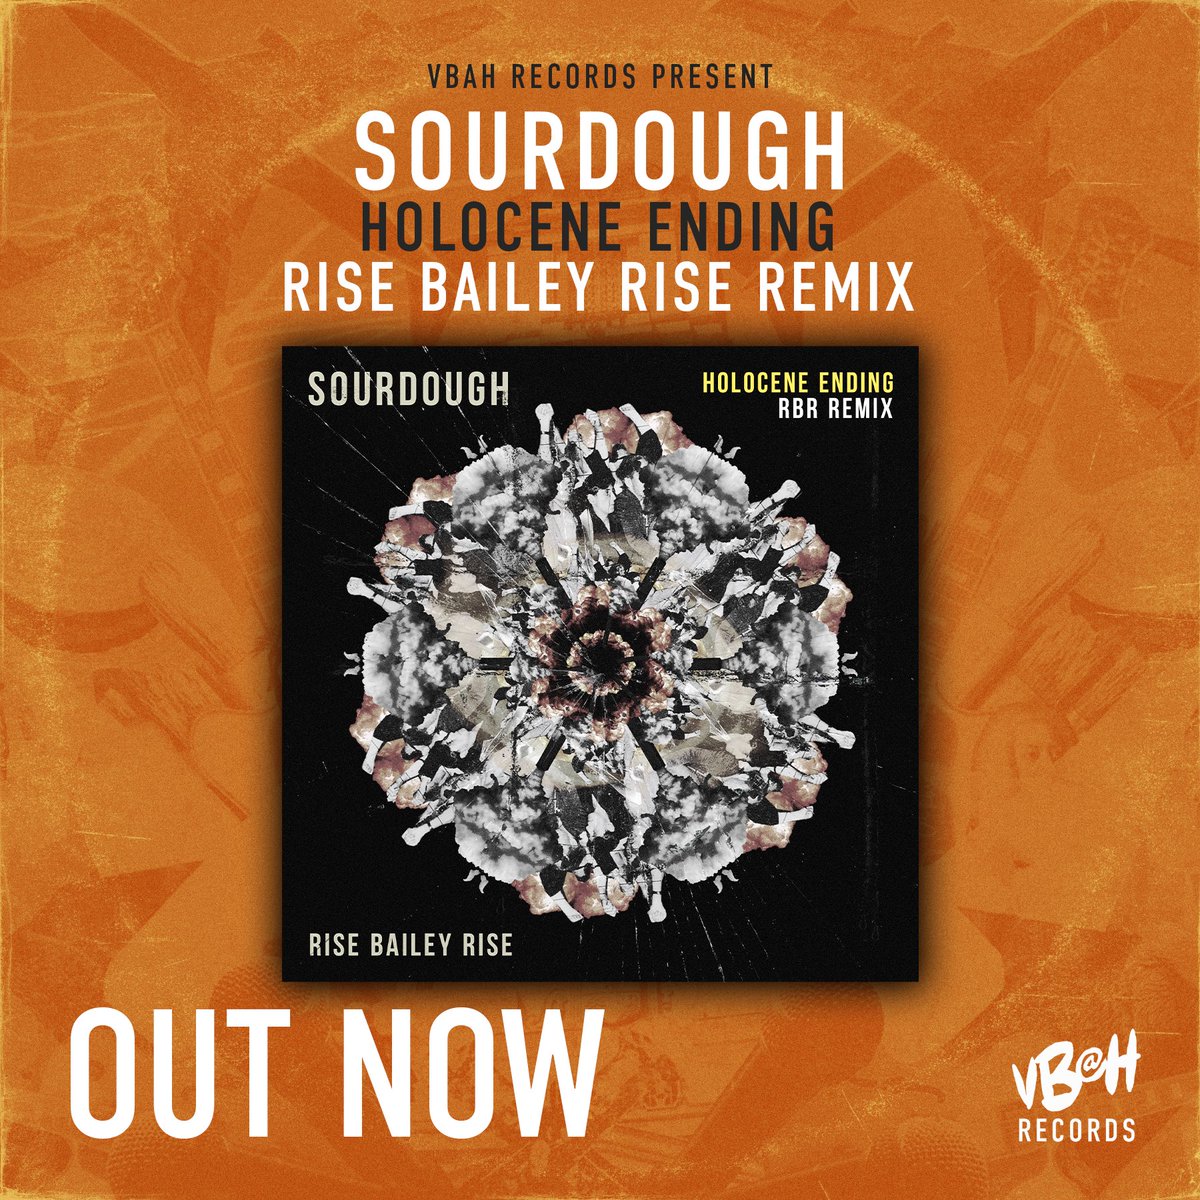 Sourdough - Holocene Ending (RBR Remix) OUT NOW! Holocene Ending, an outcry of political unrest from @BandSourdough, has been re-born into a new post-apocalyptic soundscape brought into existence by musical architect @RiseBaileyRise #NewMusic #NewMusicFriday